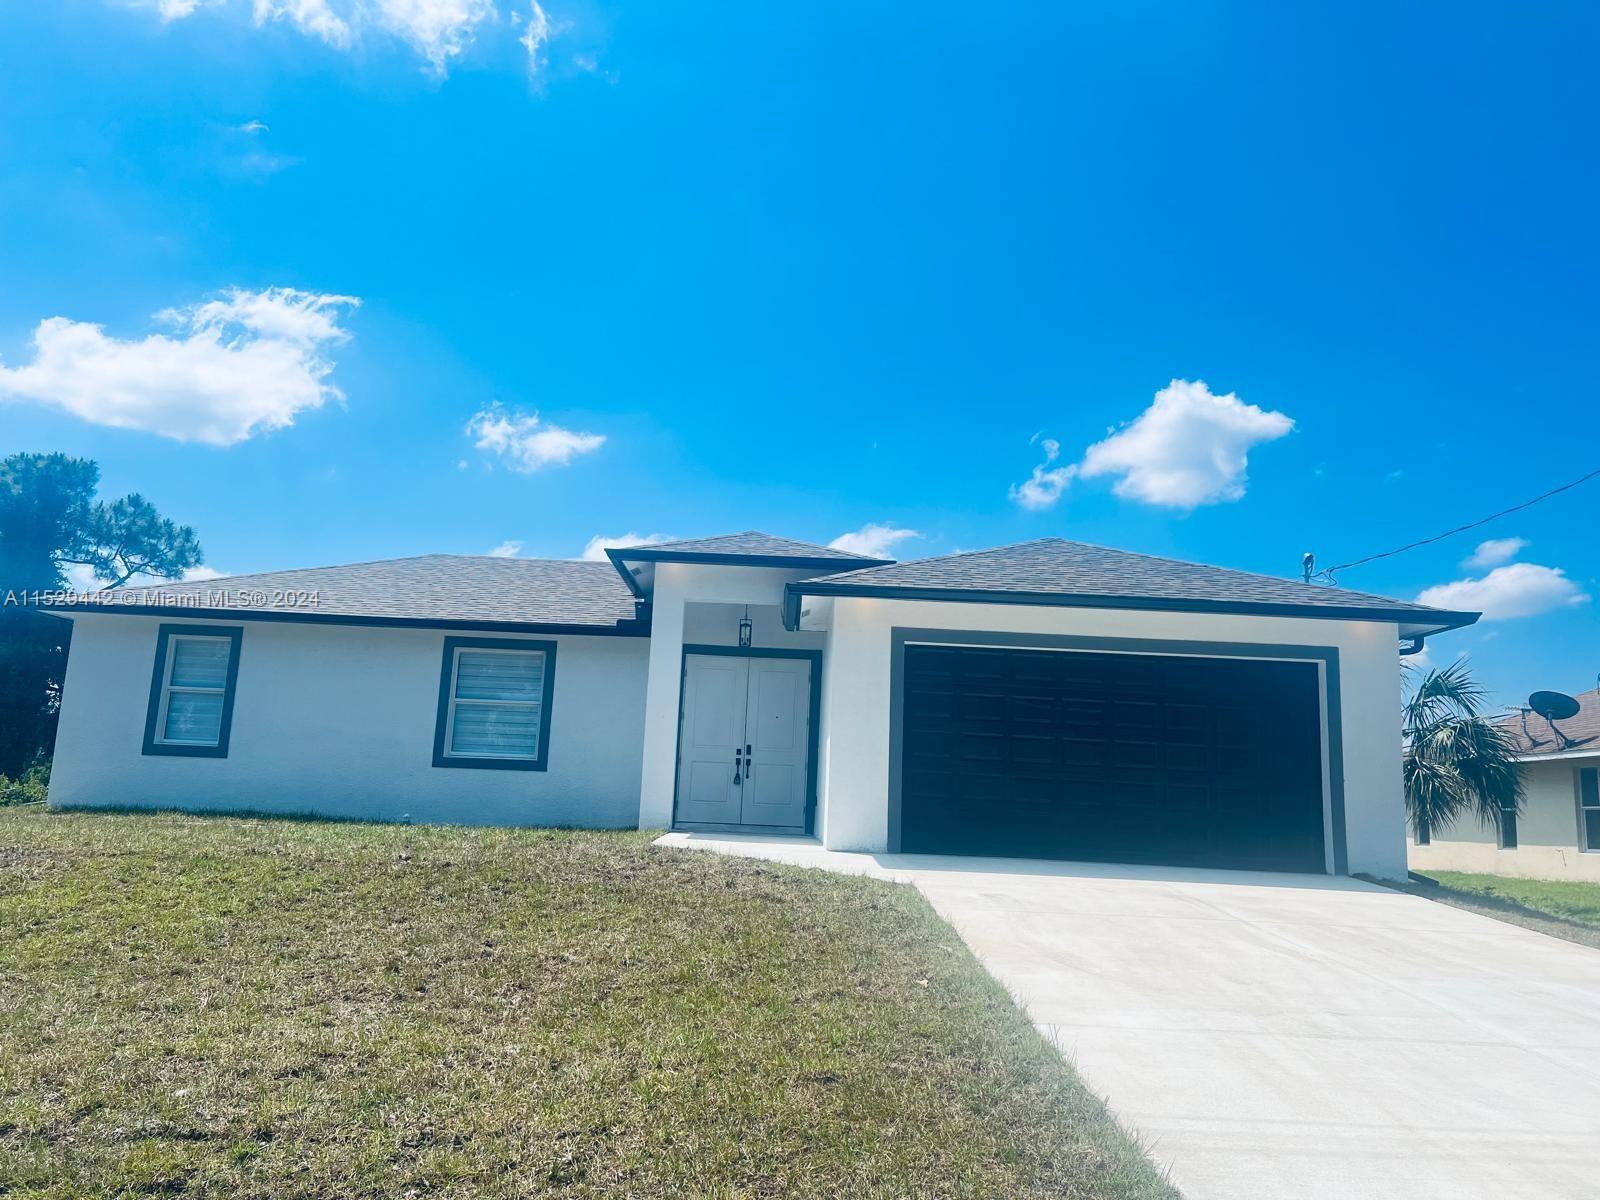 Photo of 3305 W 62nd St in Lehigh Acres, FL